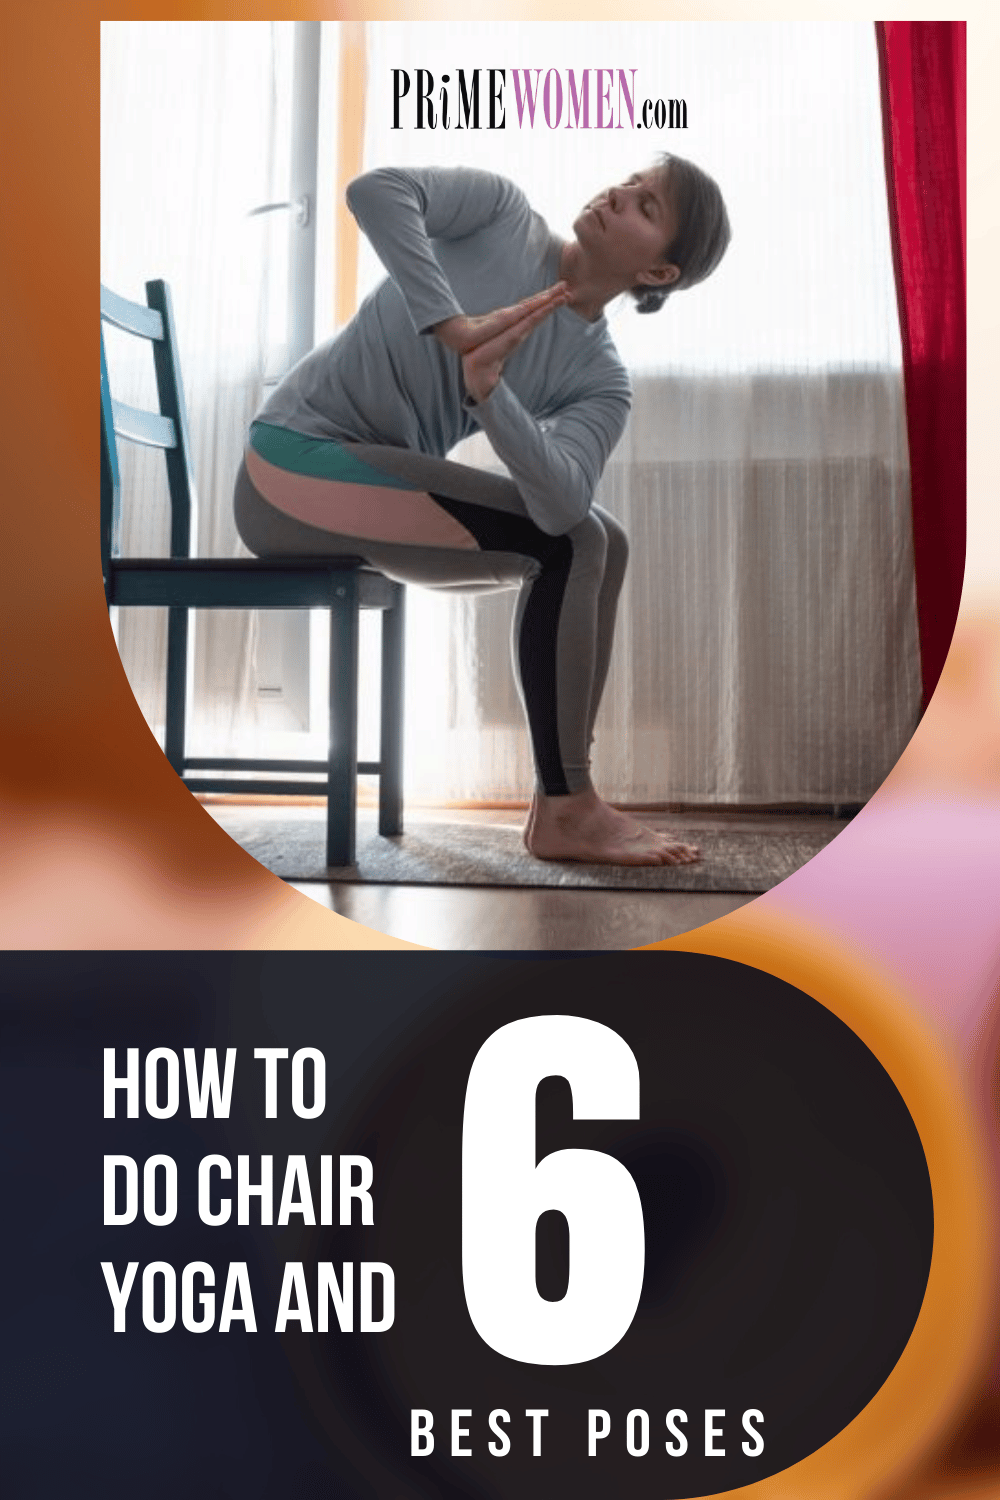 How to do chair yoga